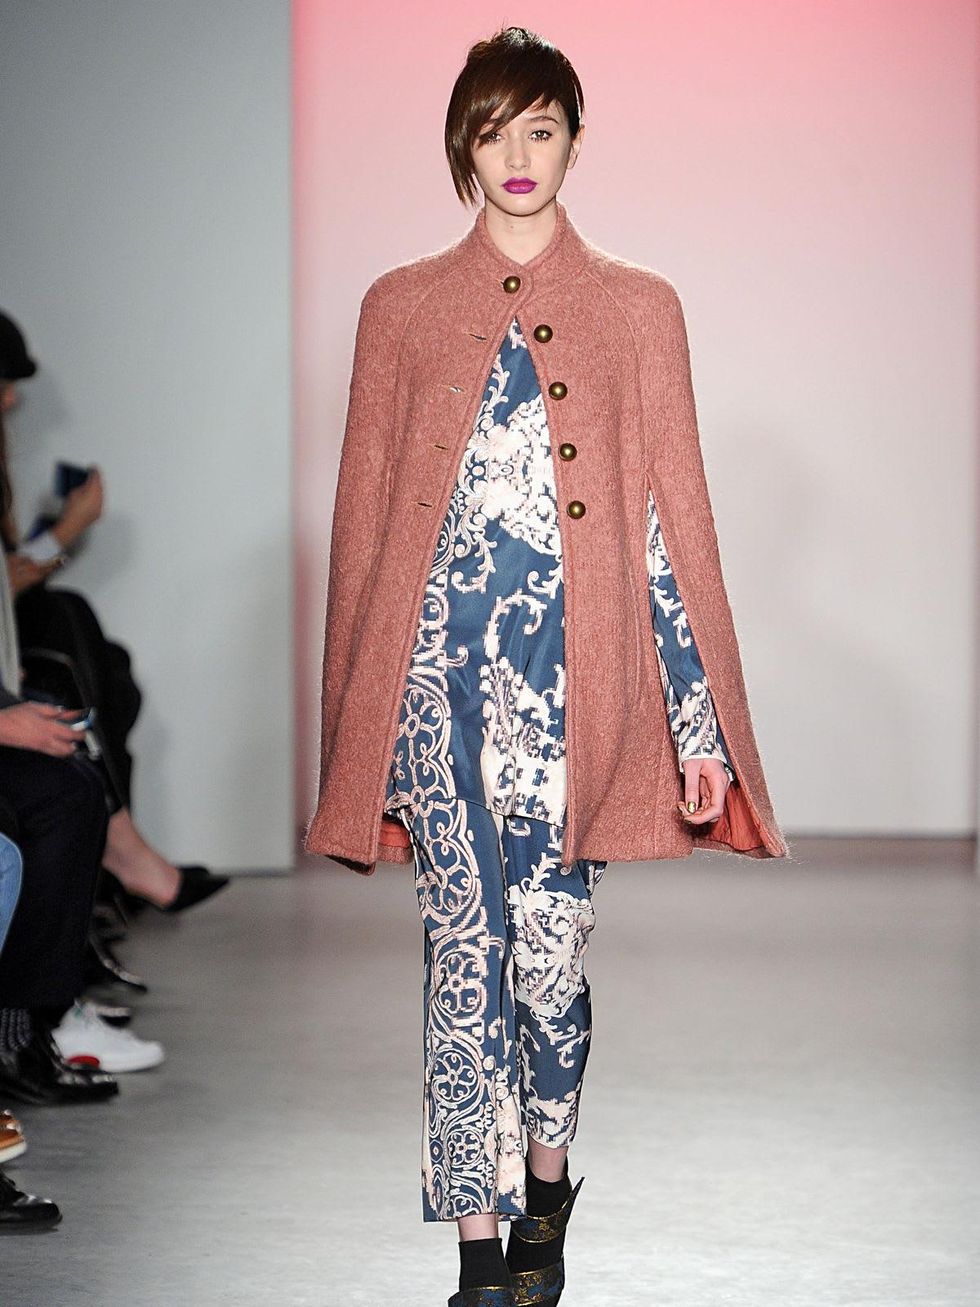 Clifford New York Fashion Week fall 2015 Nanette Lepore March 2015 Look 4